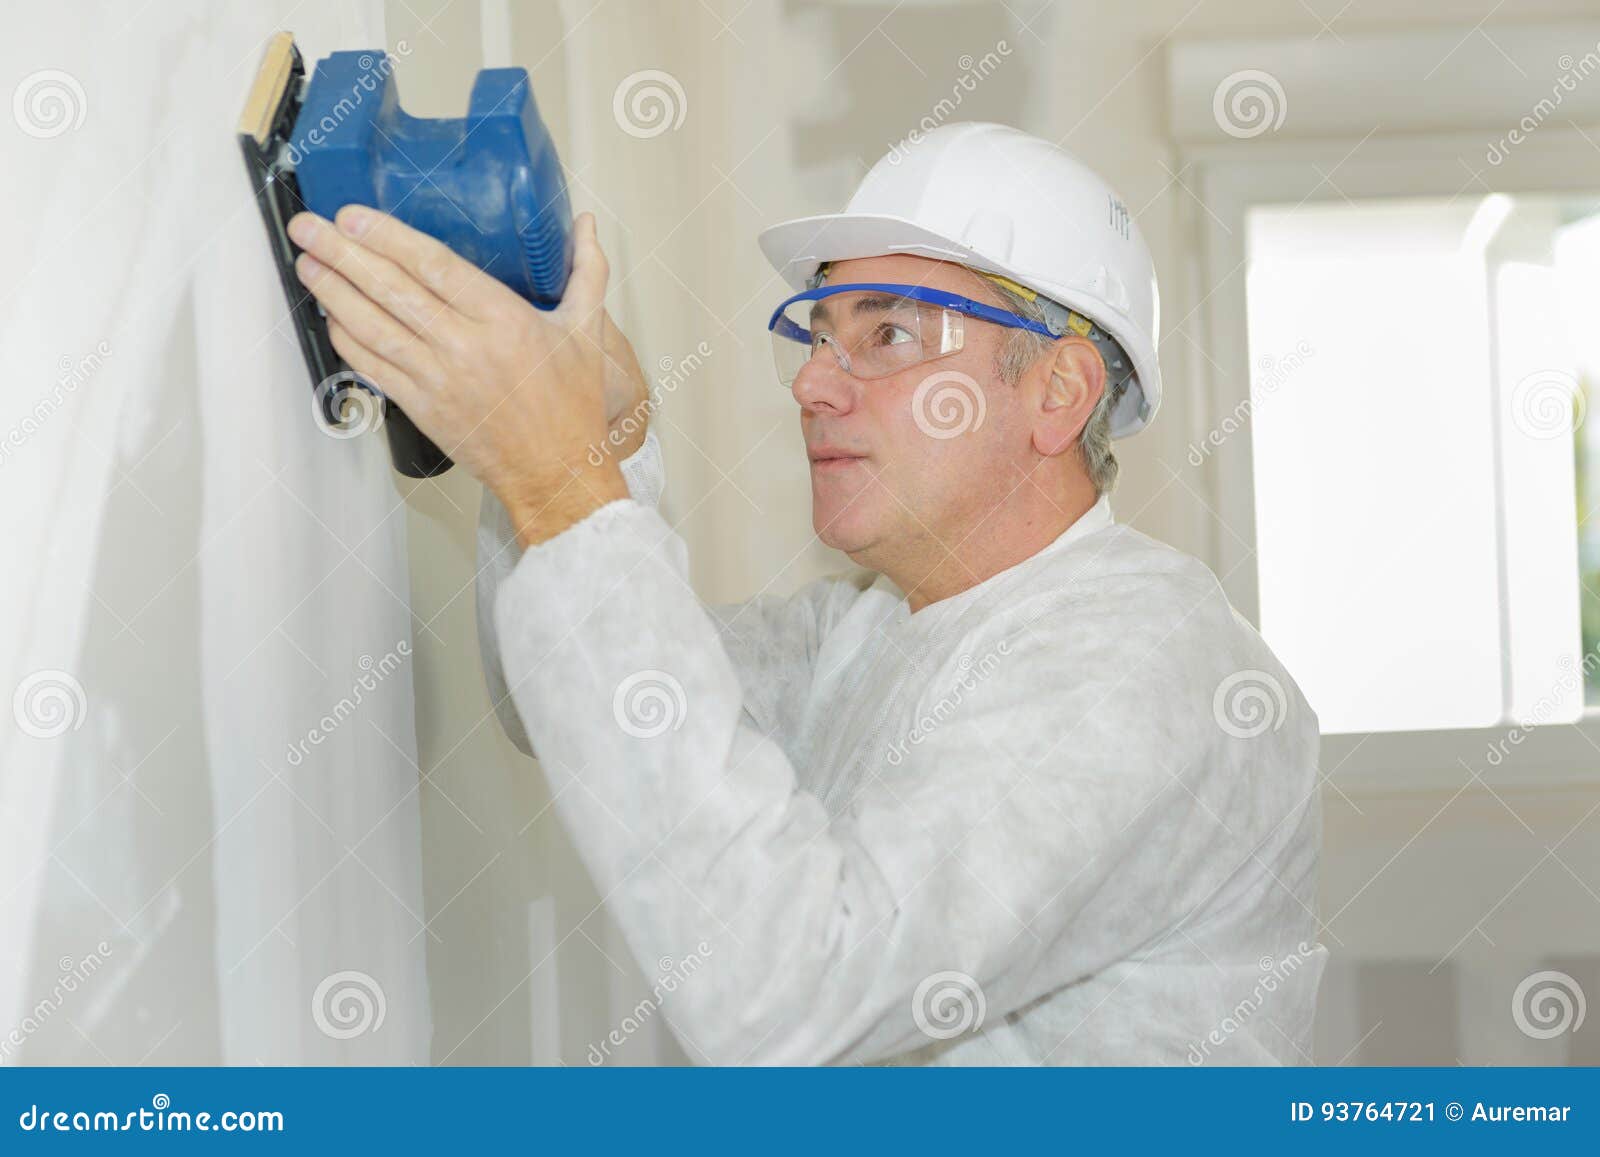 Man Sanding Wall With Power Sander Stock Image Image Of